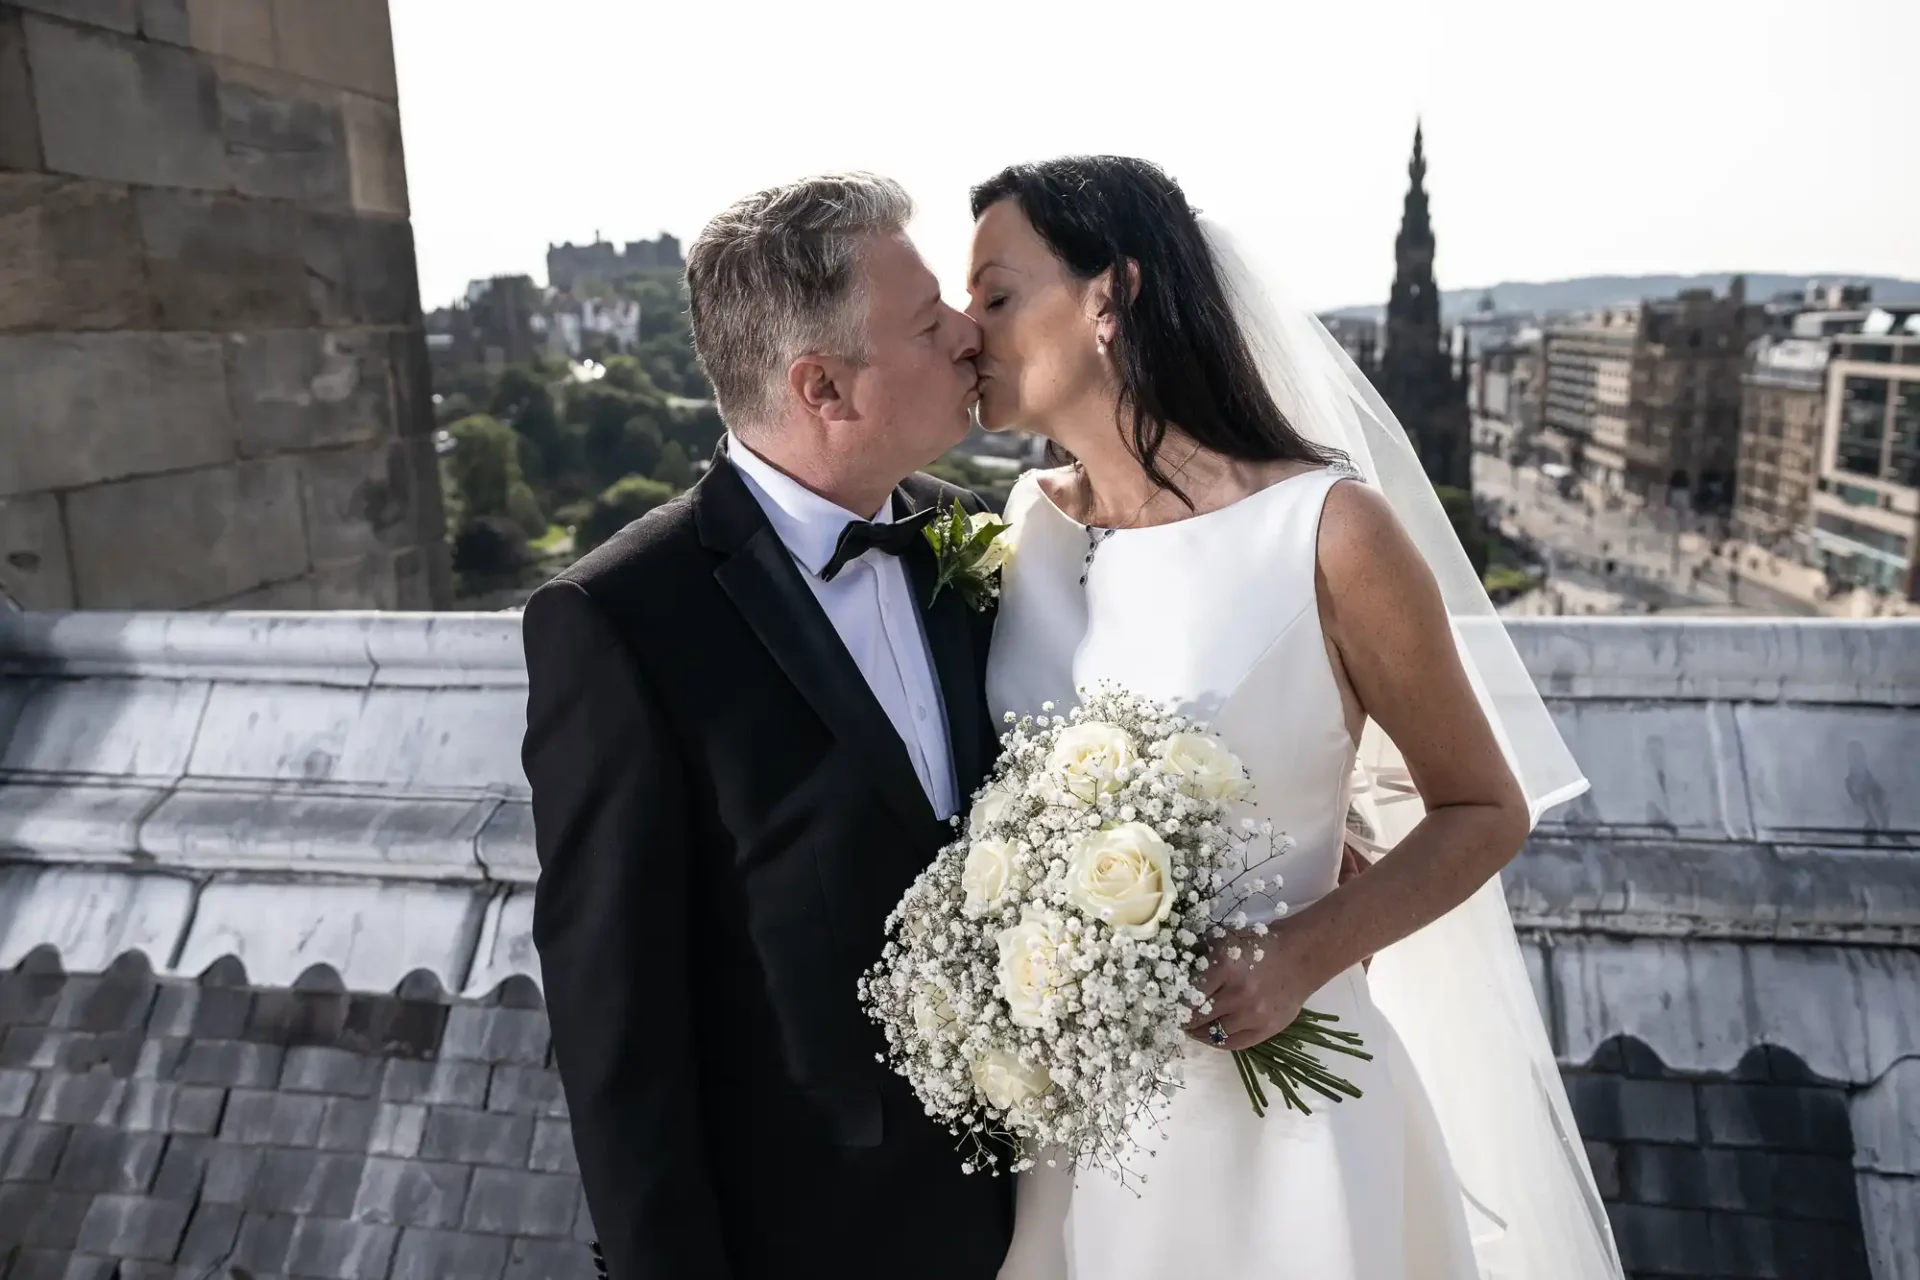 A bride and groom kissing on a rooftop with a cityscape in the background. the bride holds a bouquet of white flowers.